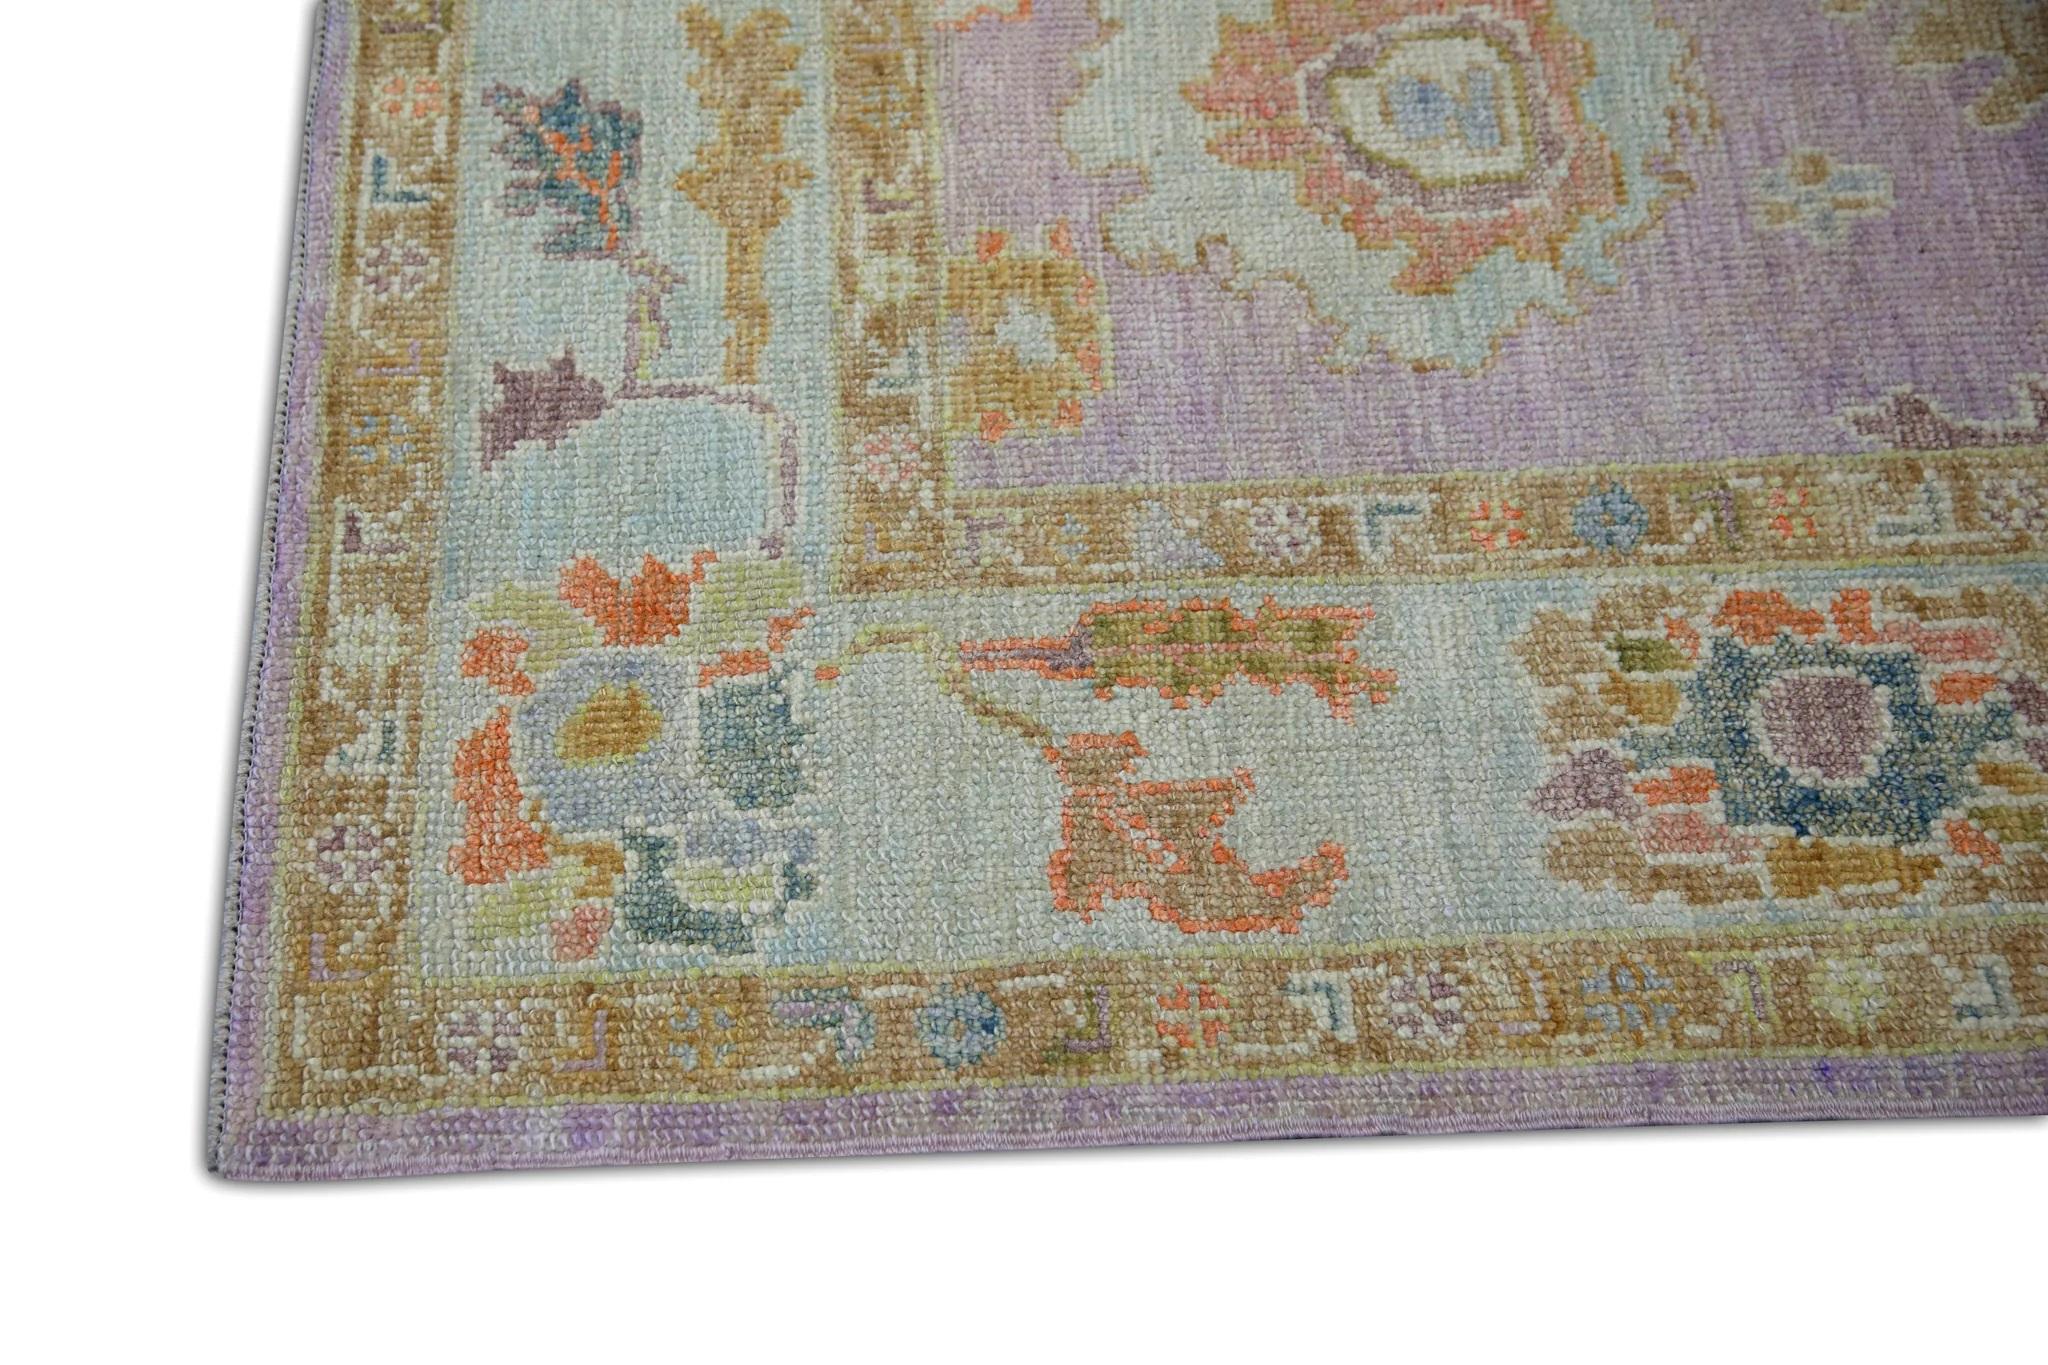 Vegetable Dyed Soft Purple Handwoven Wool Turkish Oushak Rug w/ Colorful Floral Design 5'1x6'8 For Sale